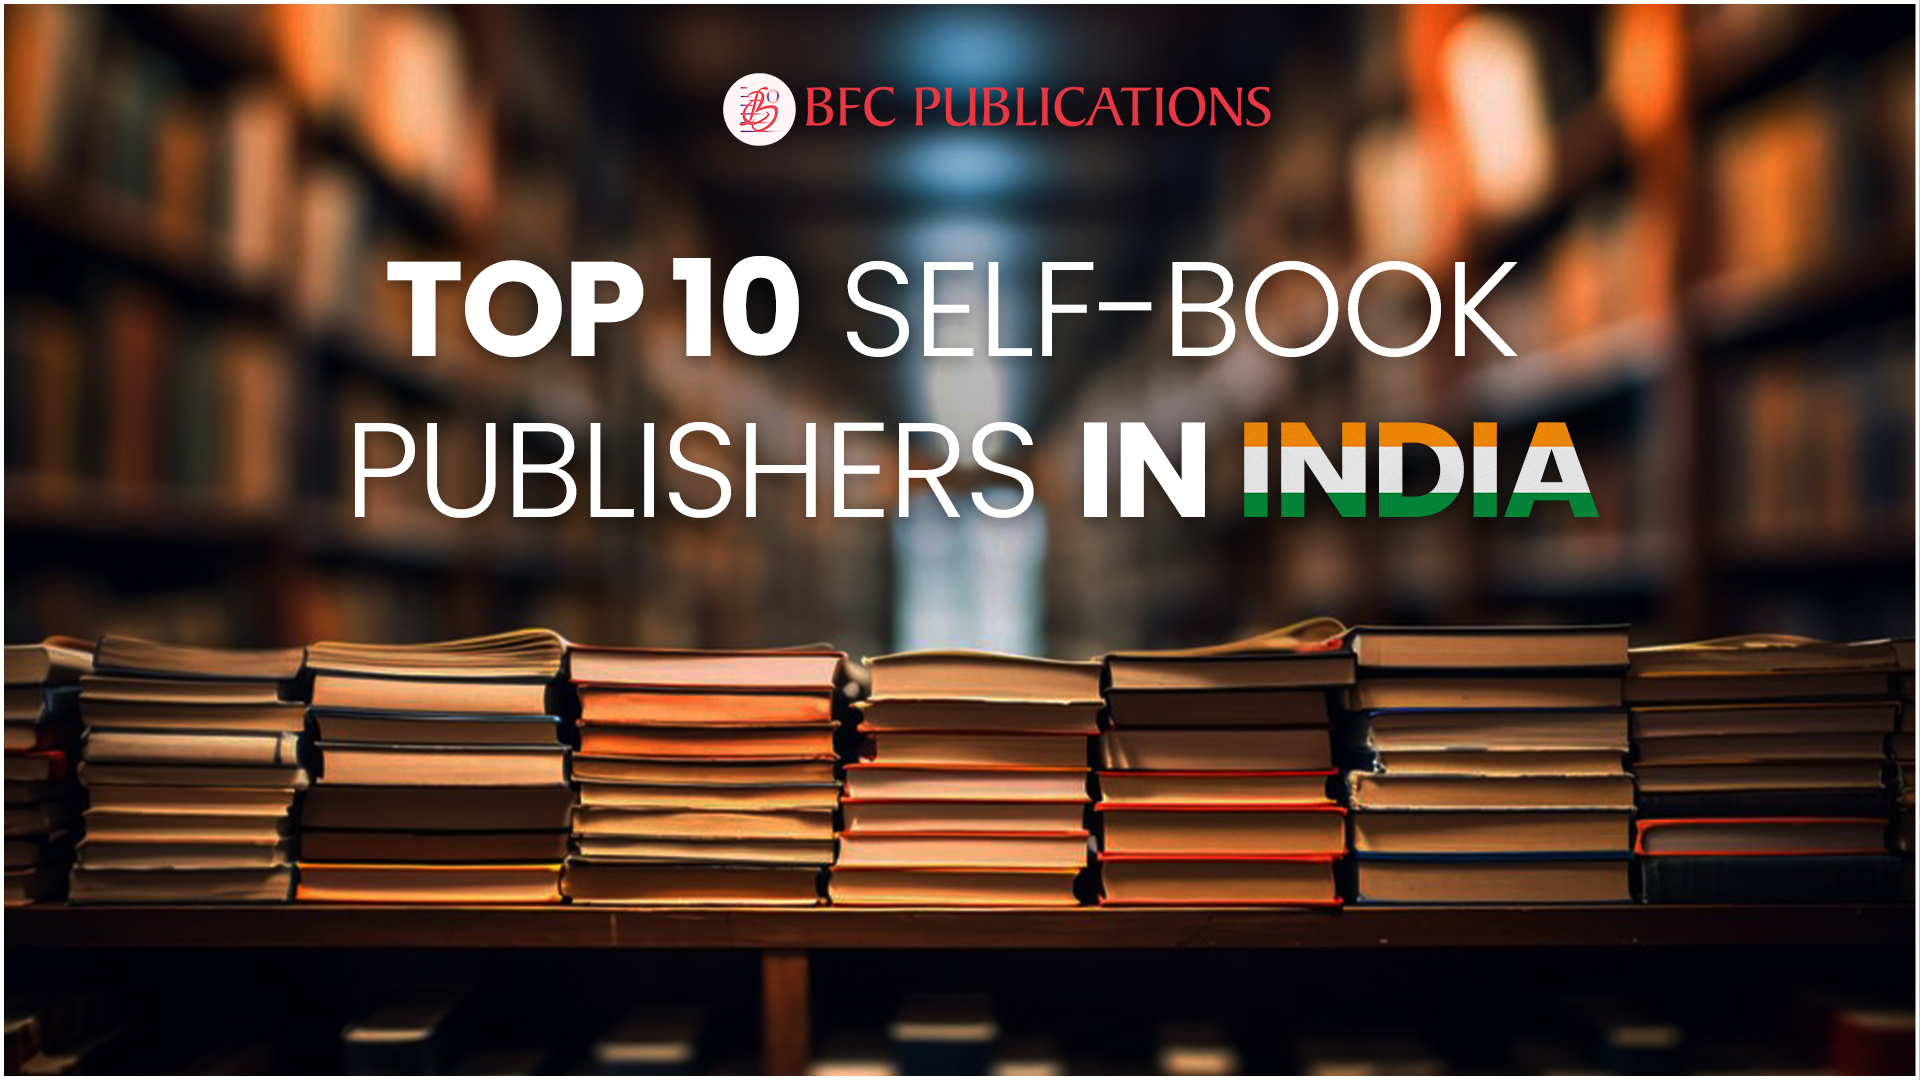 op-10-self-book-publisher-in-india